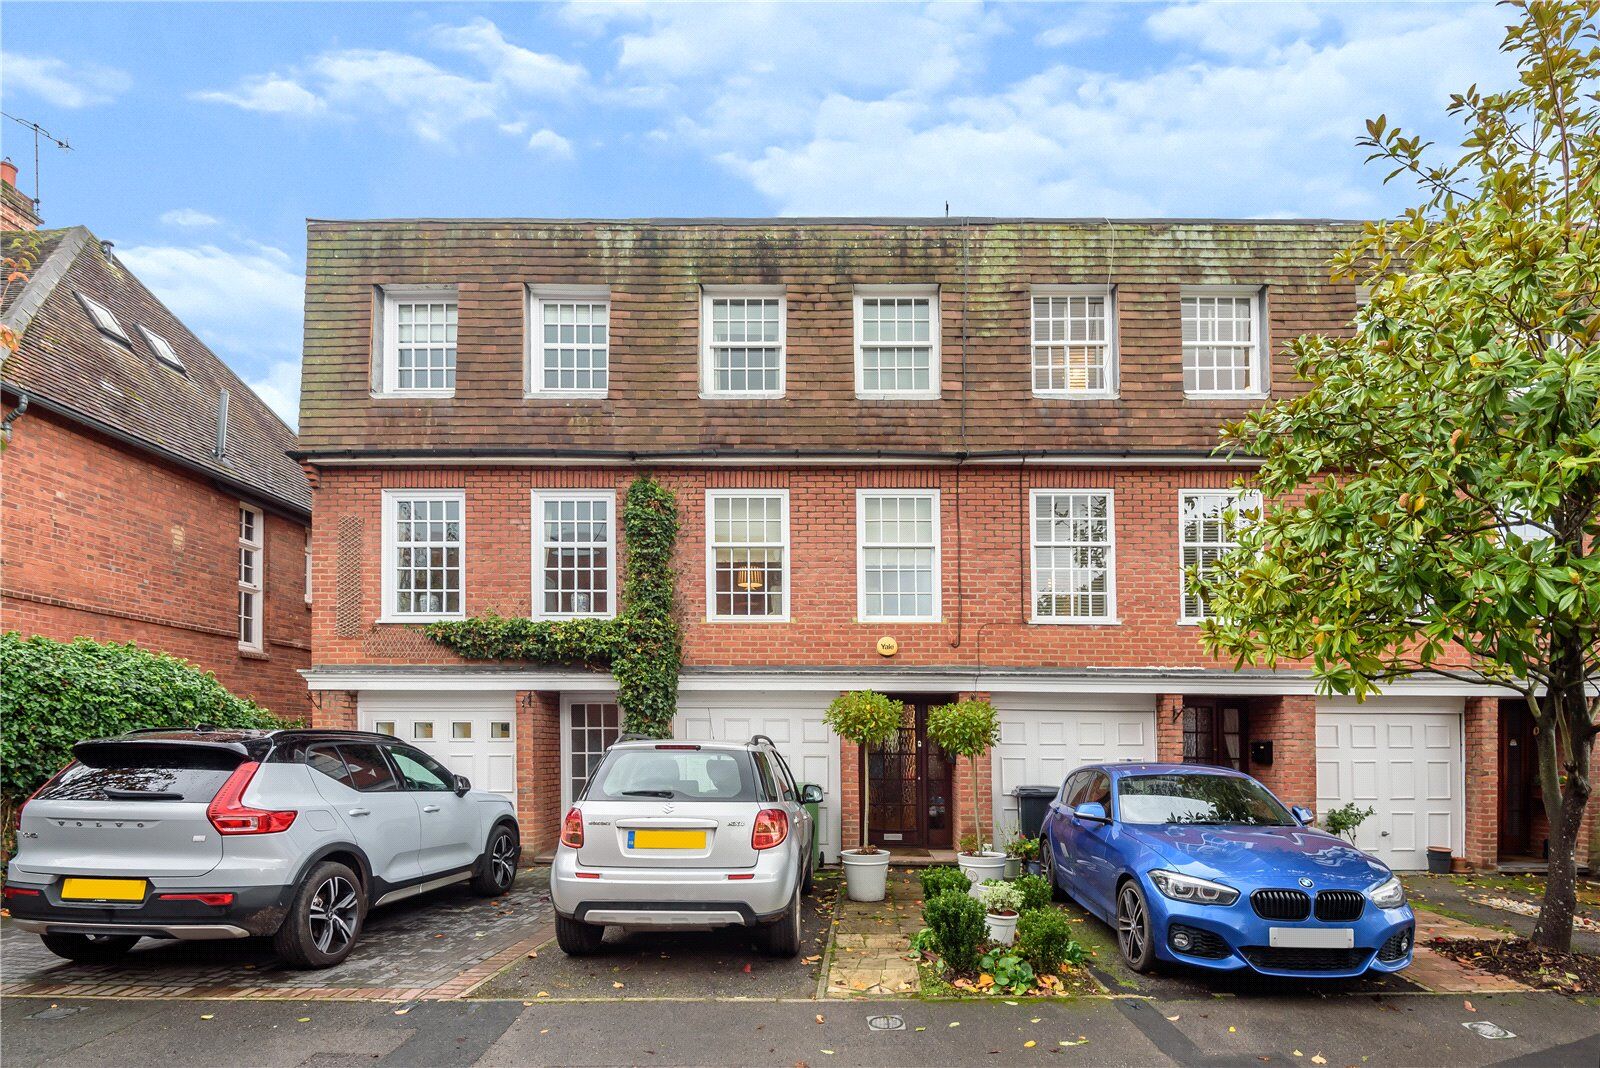 3 bedroom mid terraced house for sale Queen Close, Henley-On-Thames, RG9, main image